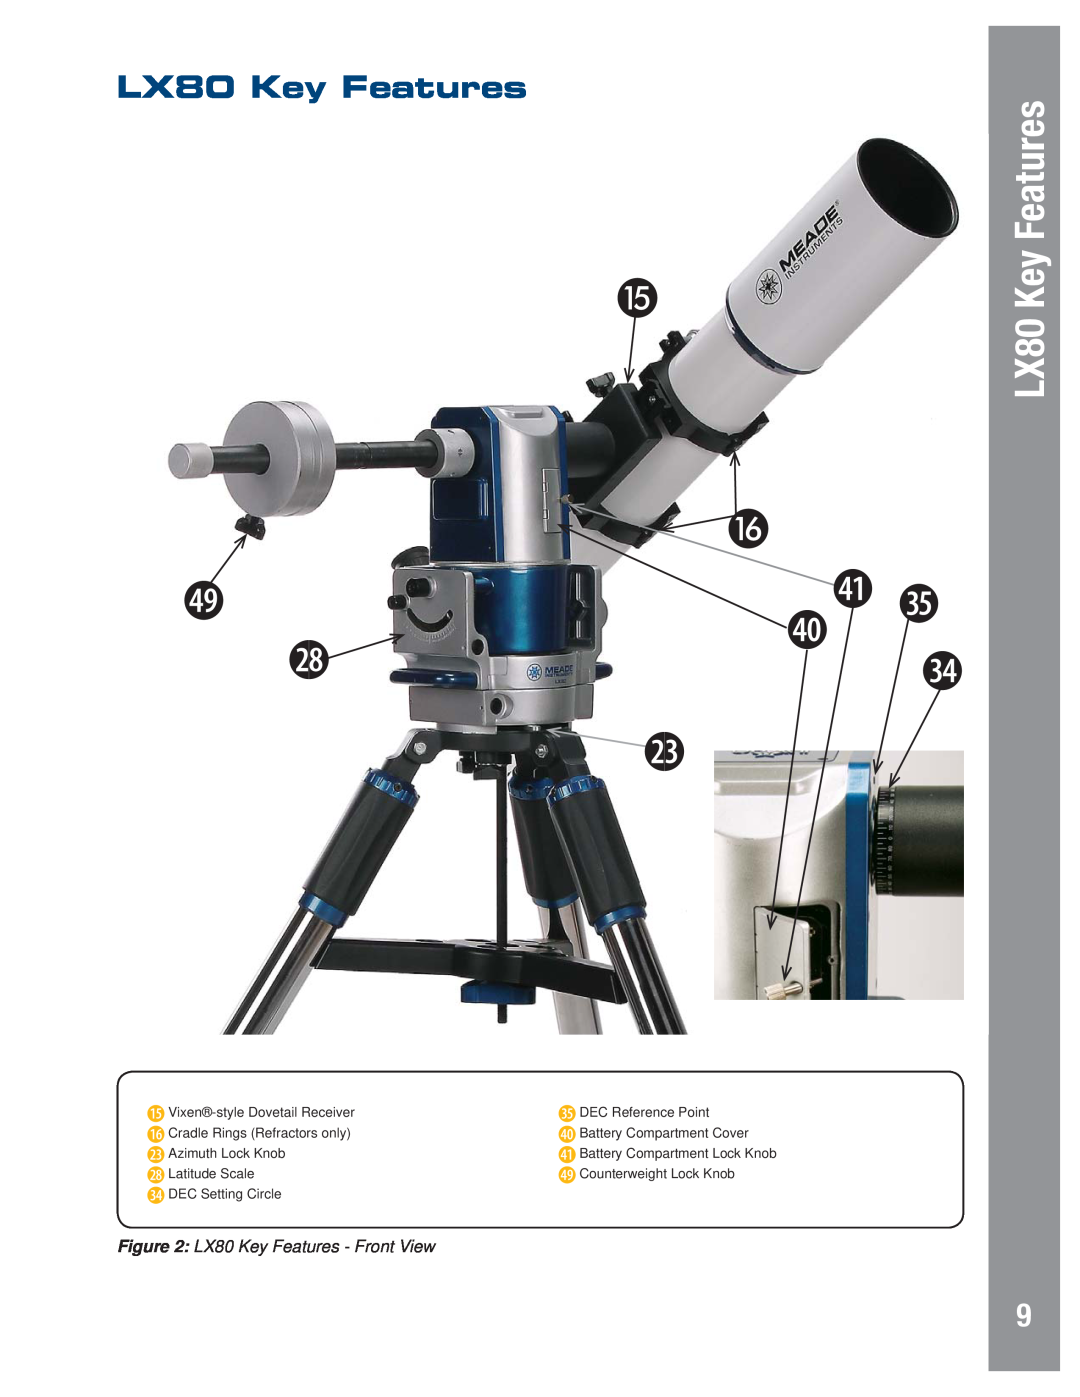 Meade instruction manual LX80 Key Features - Front View 